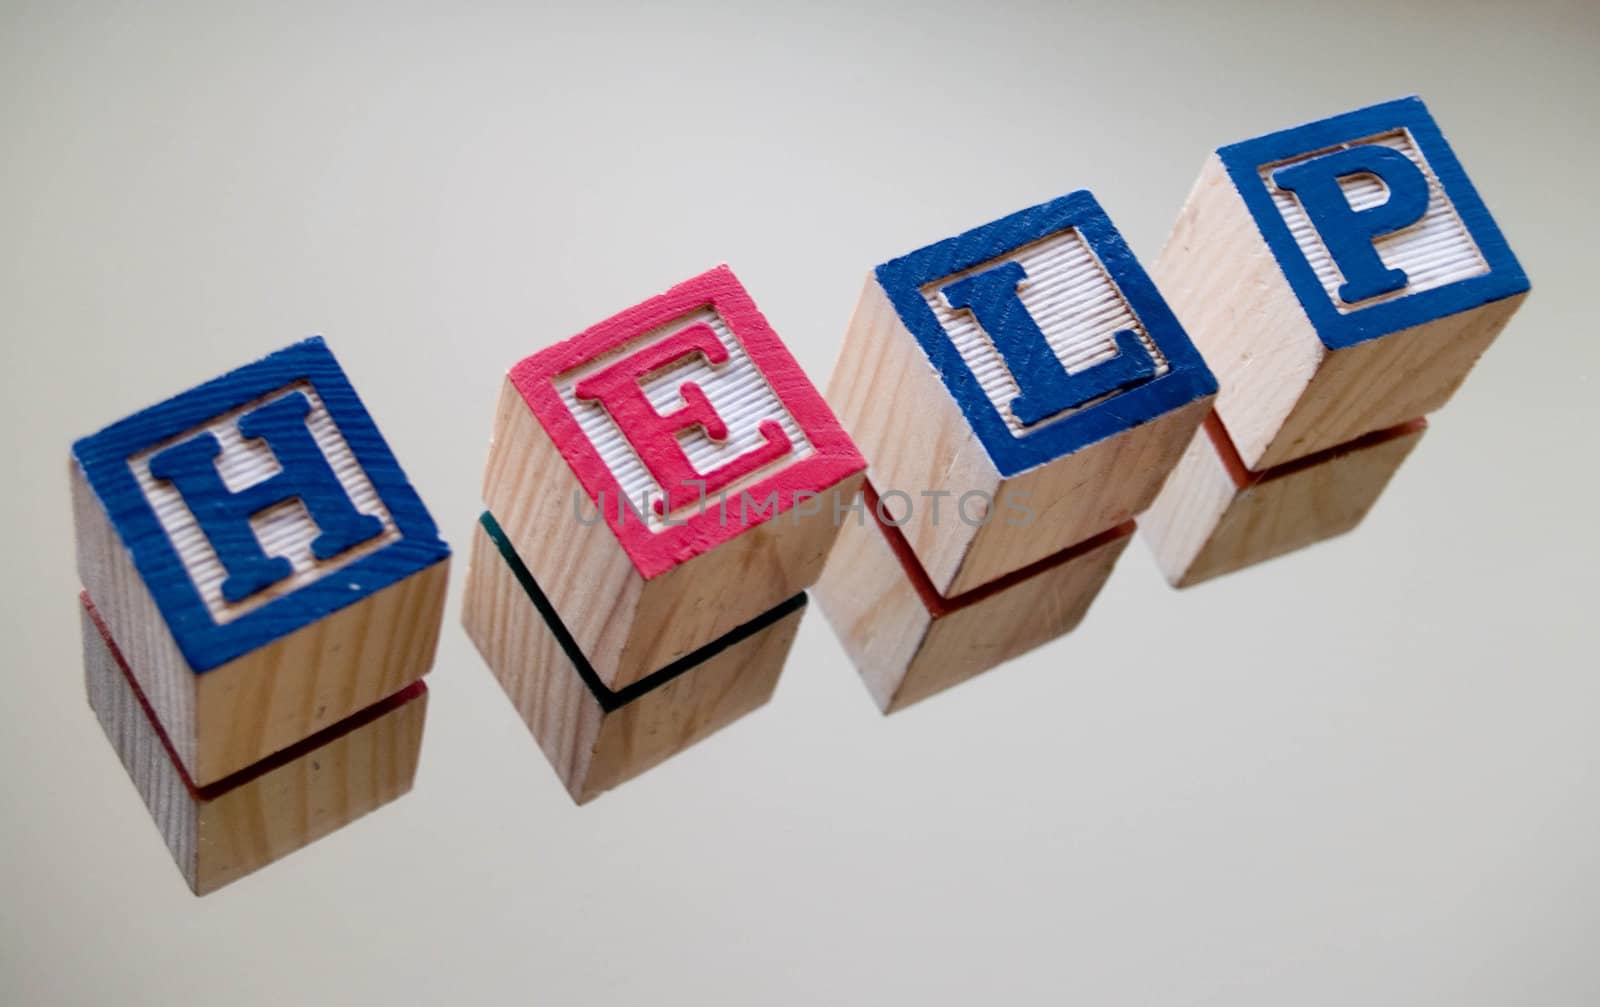 Child's blocks spelling help on a mirror surface